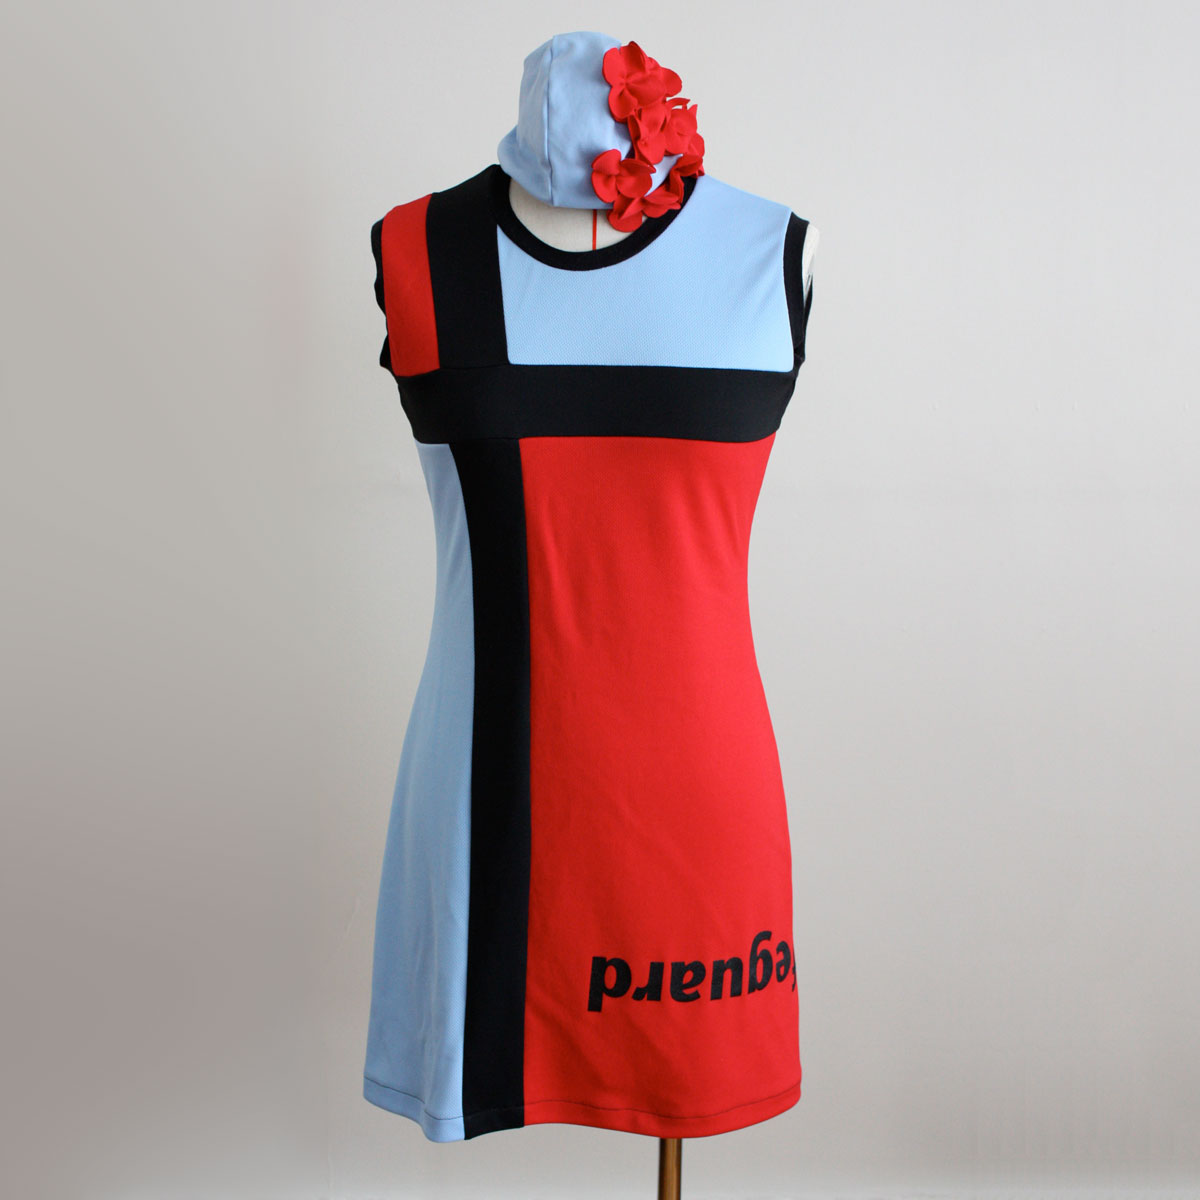 Splash! dress reconstructed from pool uniforms